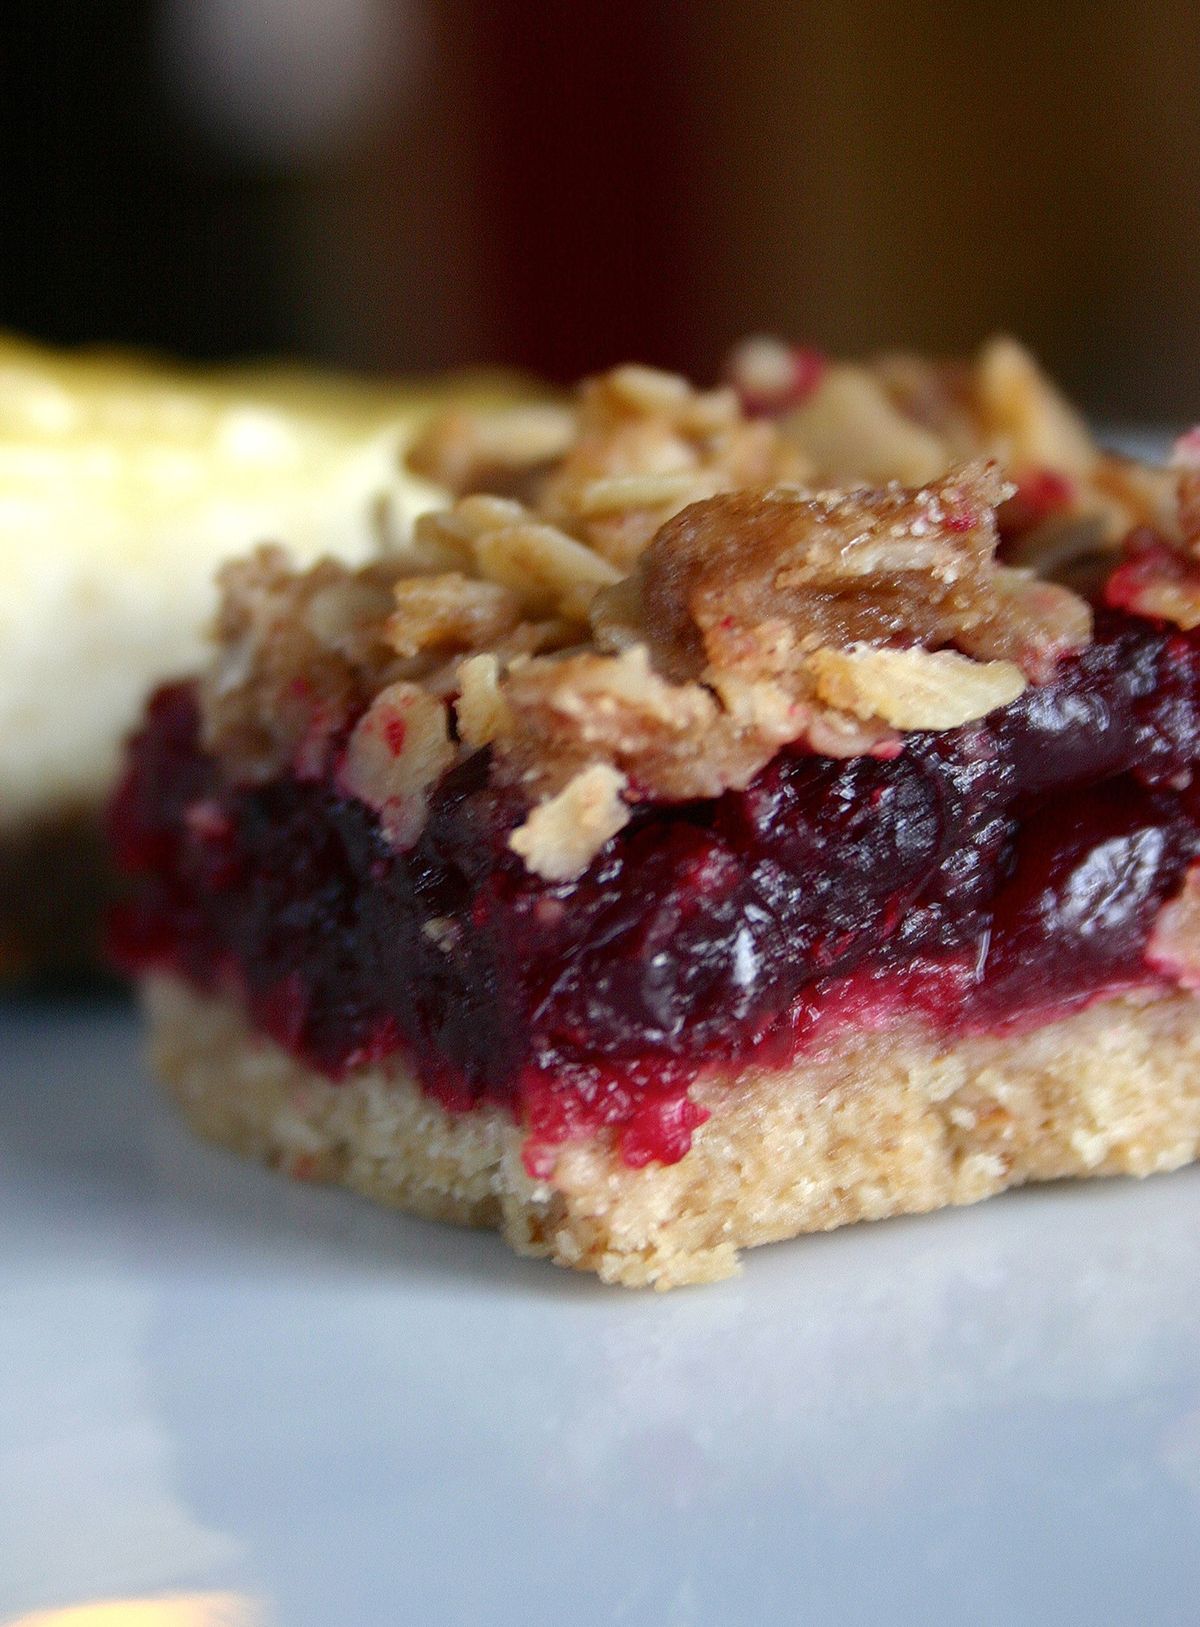 Cranberry Streusel Bars combine a seasonal super food with everyone’s favorite oatmeal crumble for a festive holiday treat. (Lorie Hutson)